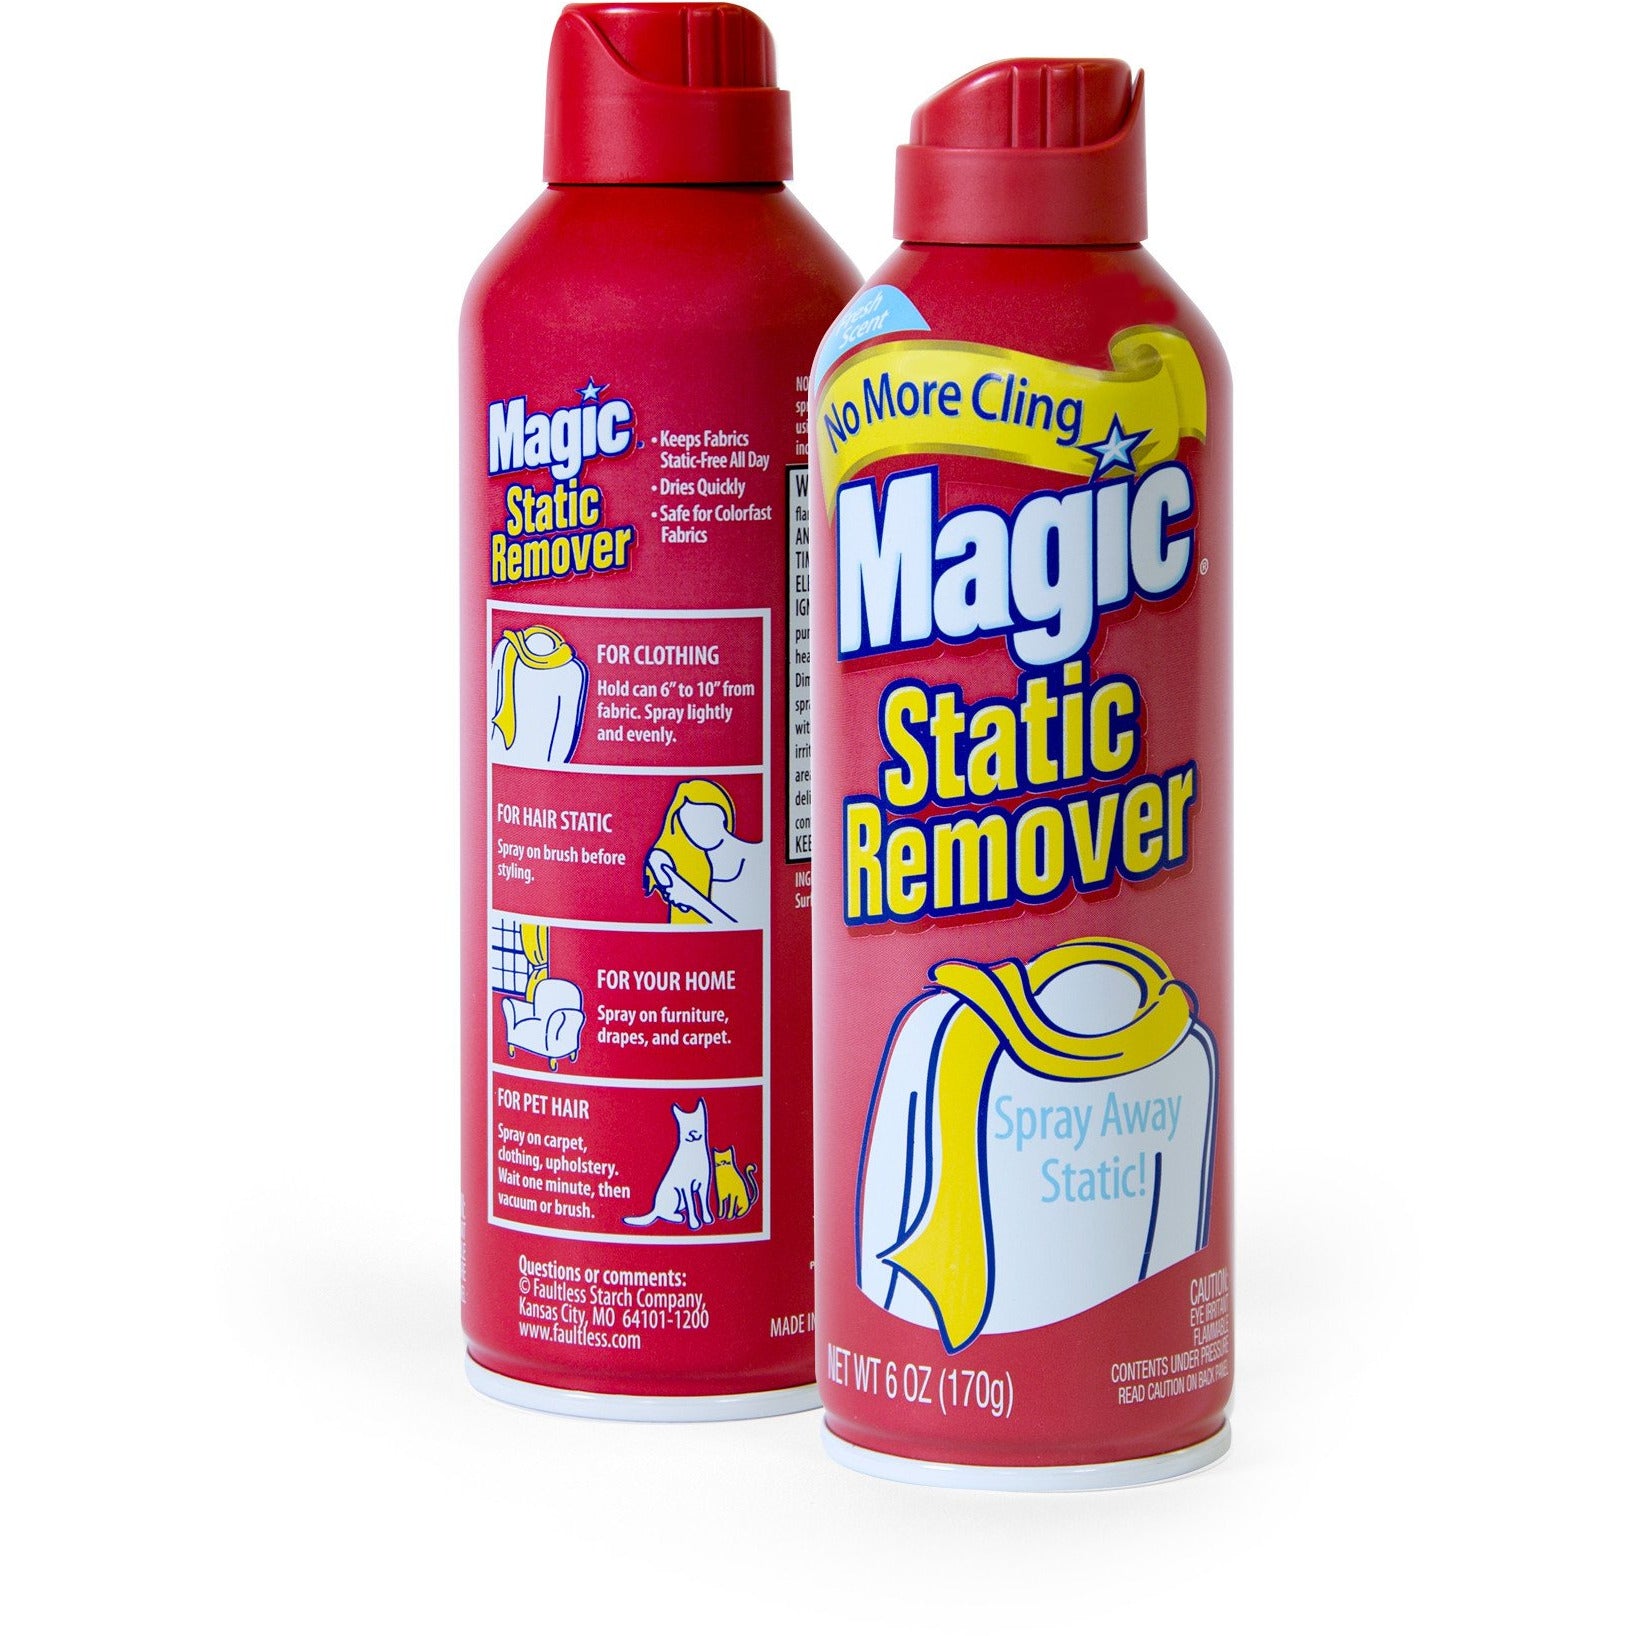 Magic Static Remover, Pack of 2 - No More Cling Static Spray, Eliminates Static Cling, Anti-Static Spray for Clothes, Furniture & Car - Static Free